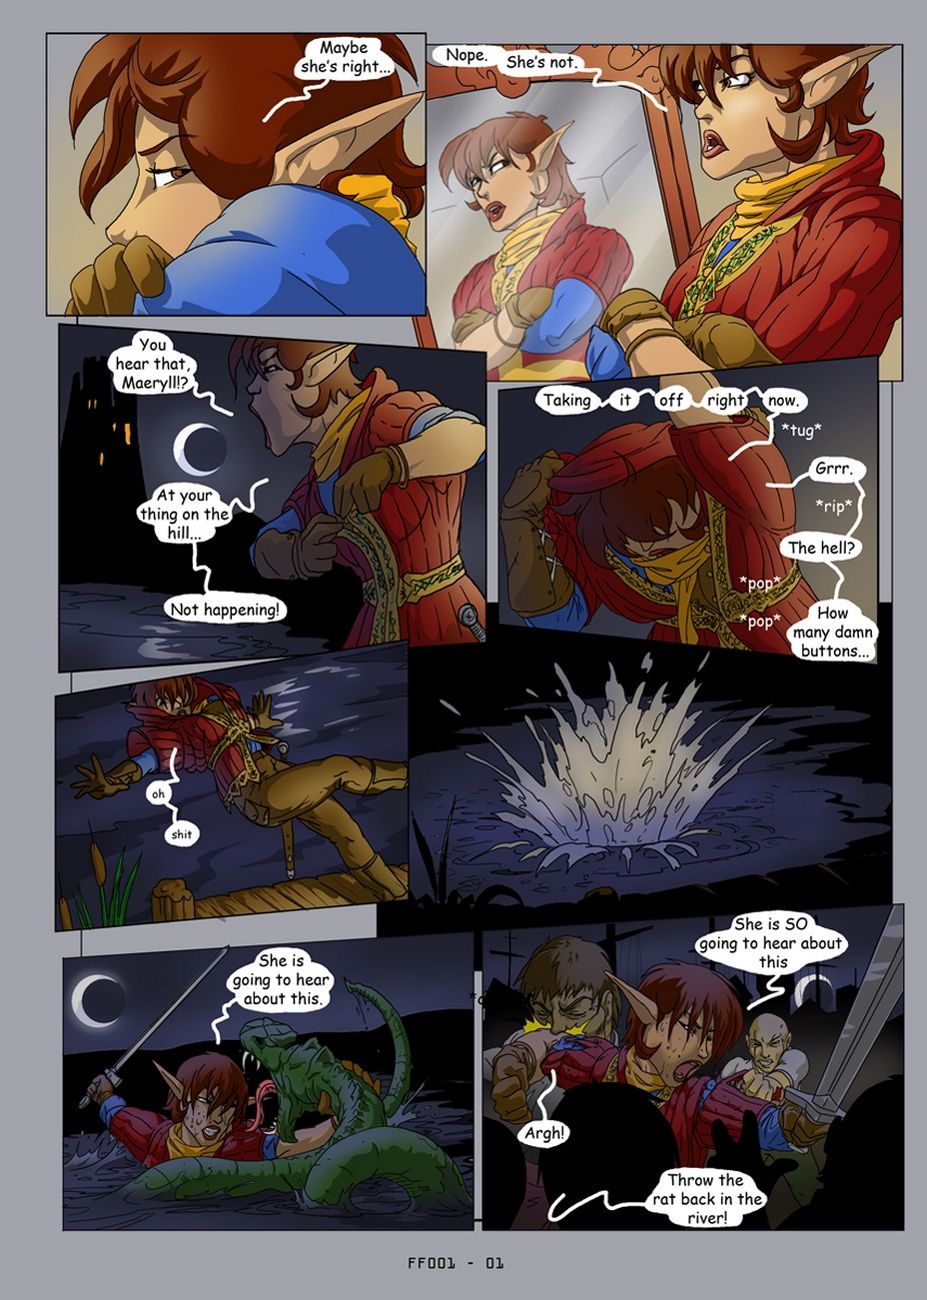 Friends Fight - Resolution page 2